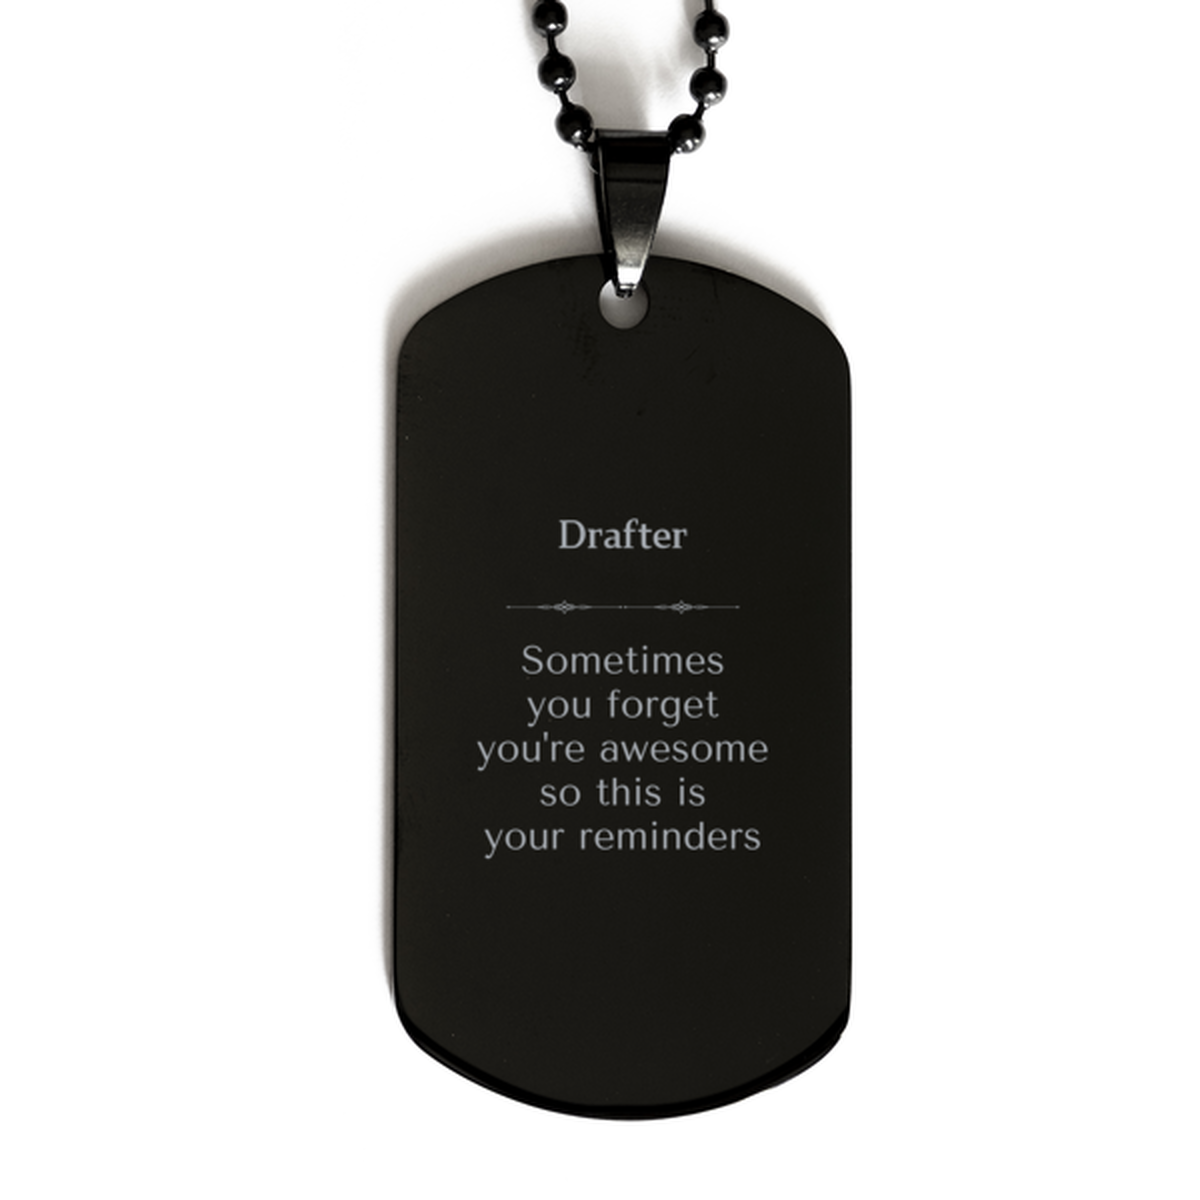 Sentimental Drafter Black Dog Tag, Drafter Sometimes you forget you're awesome so this is your reminders, Graduation Christmas Birthday Gifts for Drafter, Men, Women, Coworkers